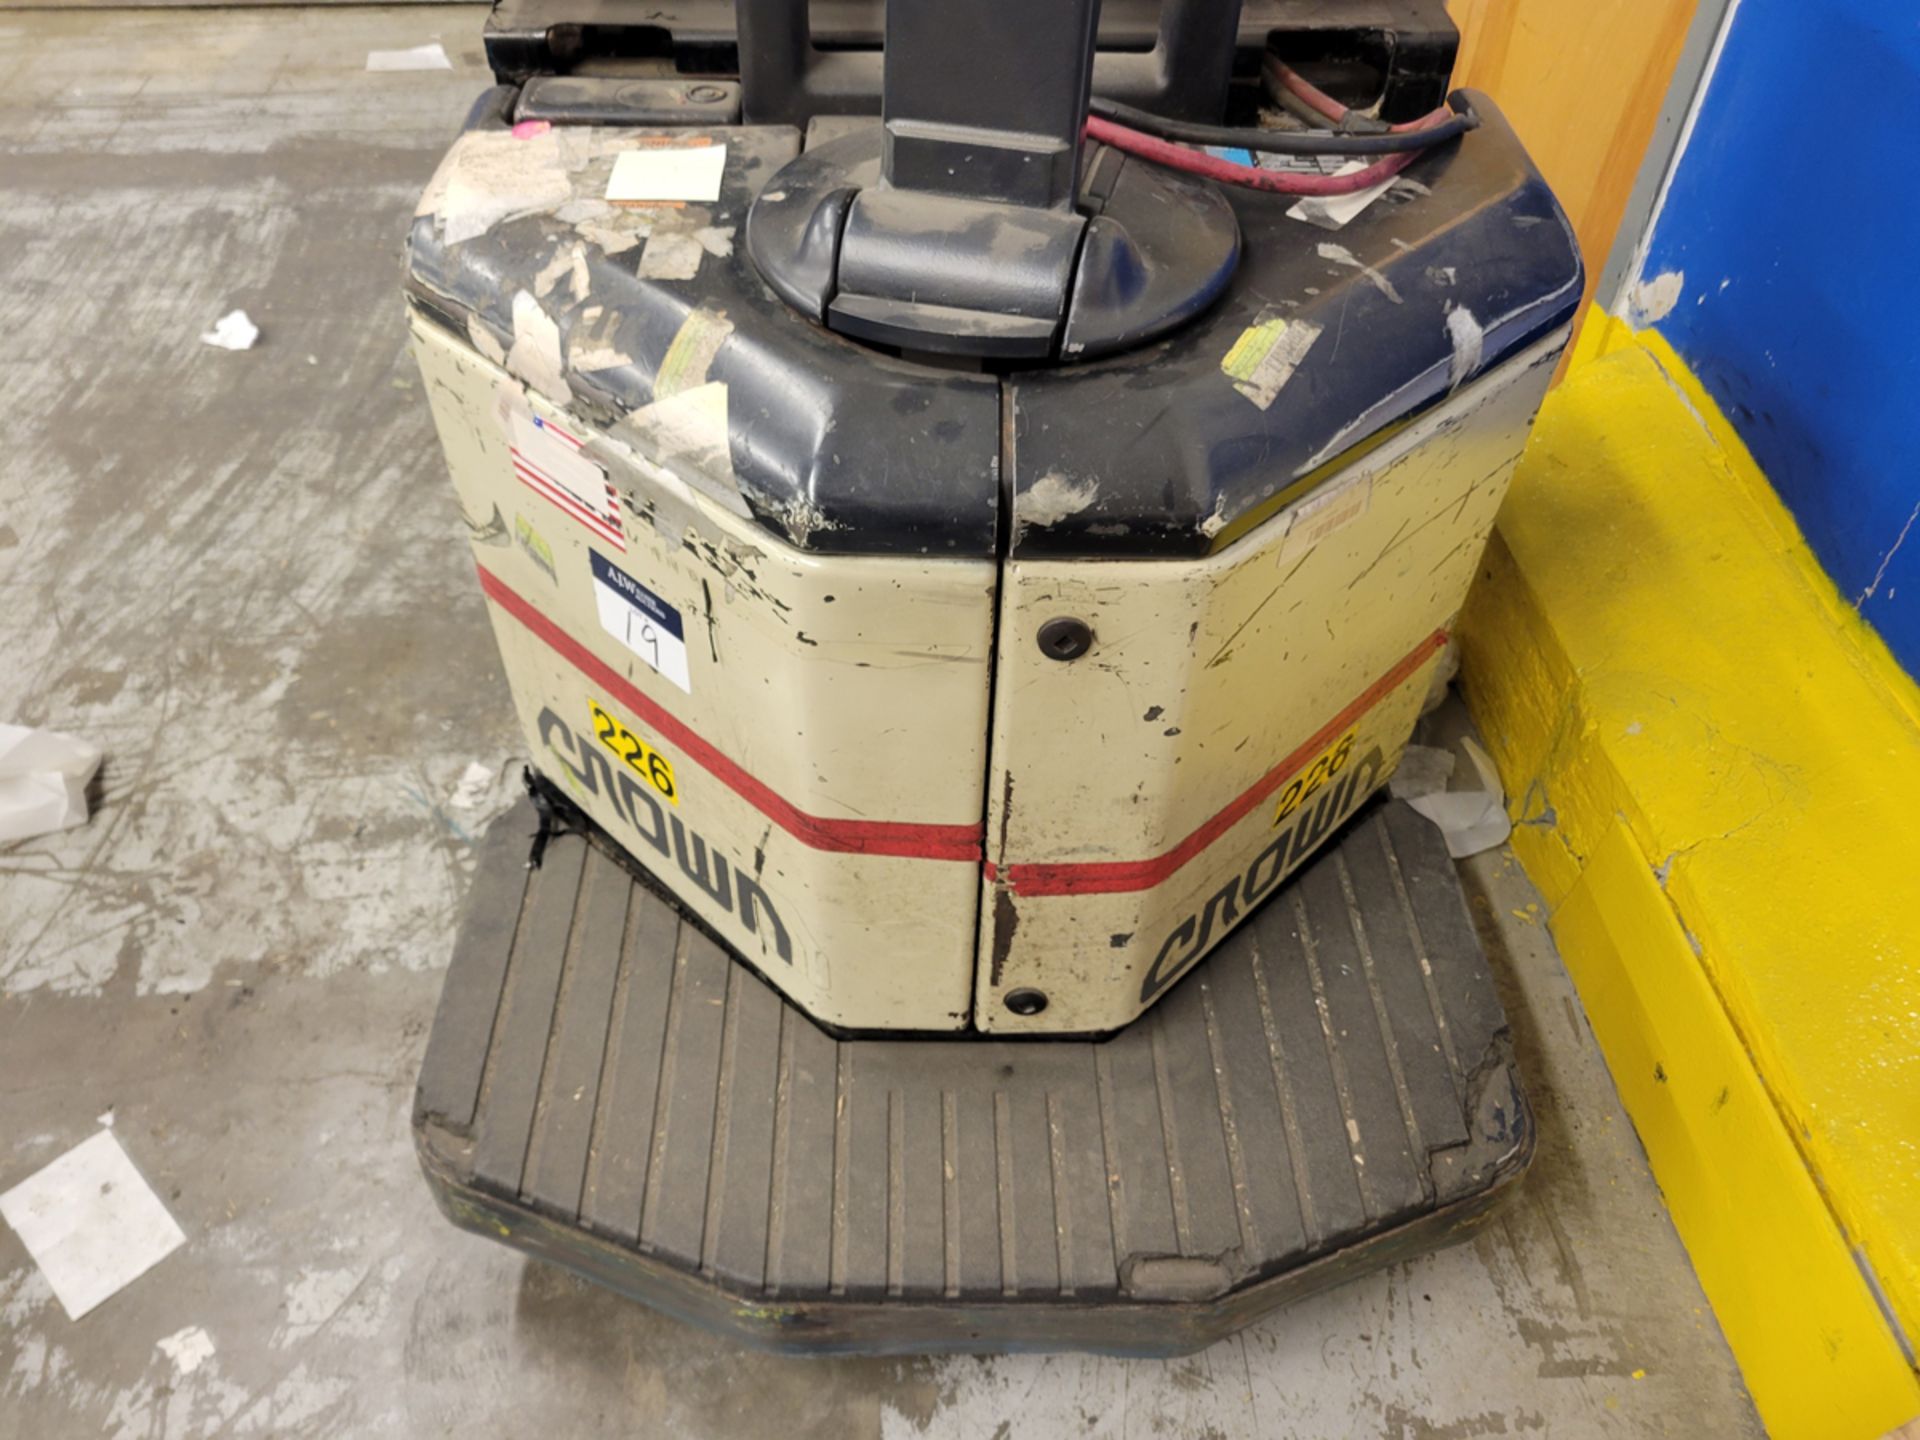 Crown PE3520-60 6,000lbs Electric 24V Rider Pallet Jack w/ Charger - Image 3 of 10